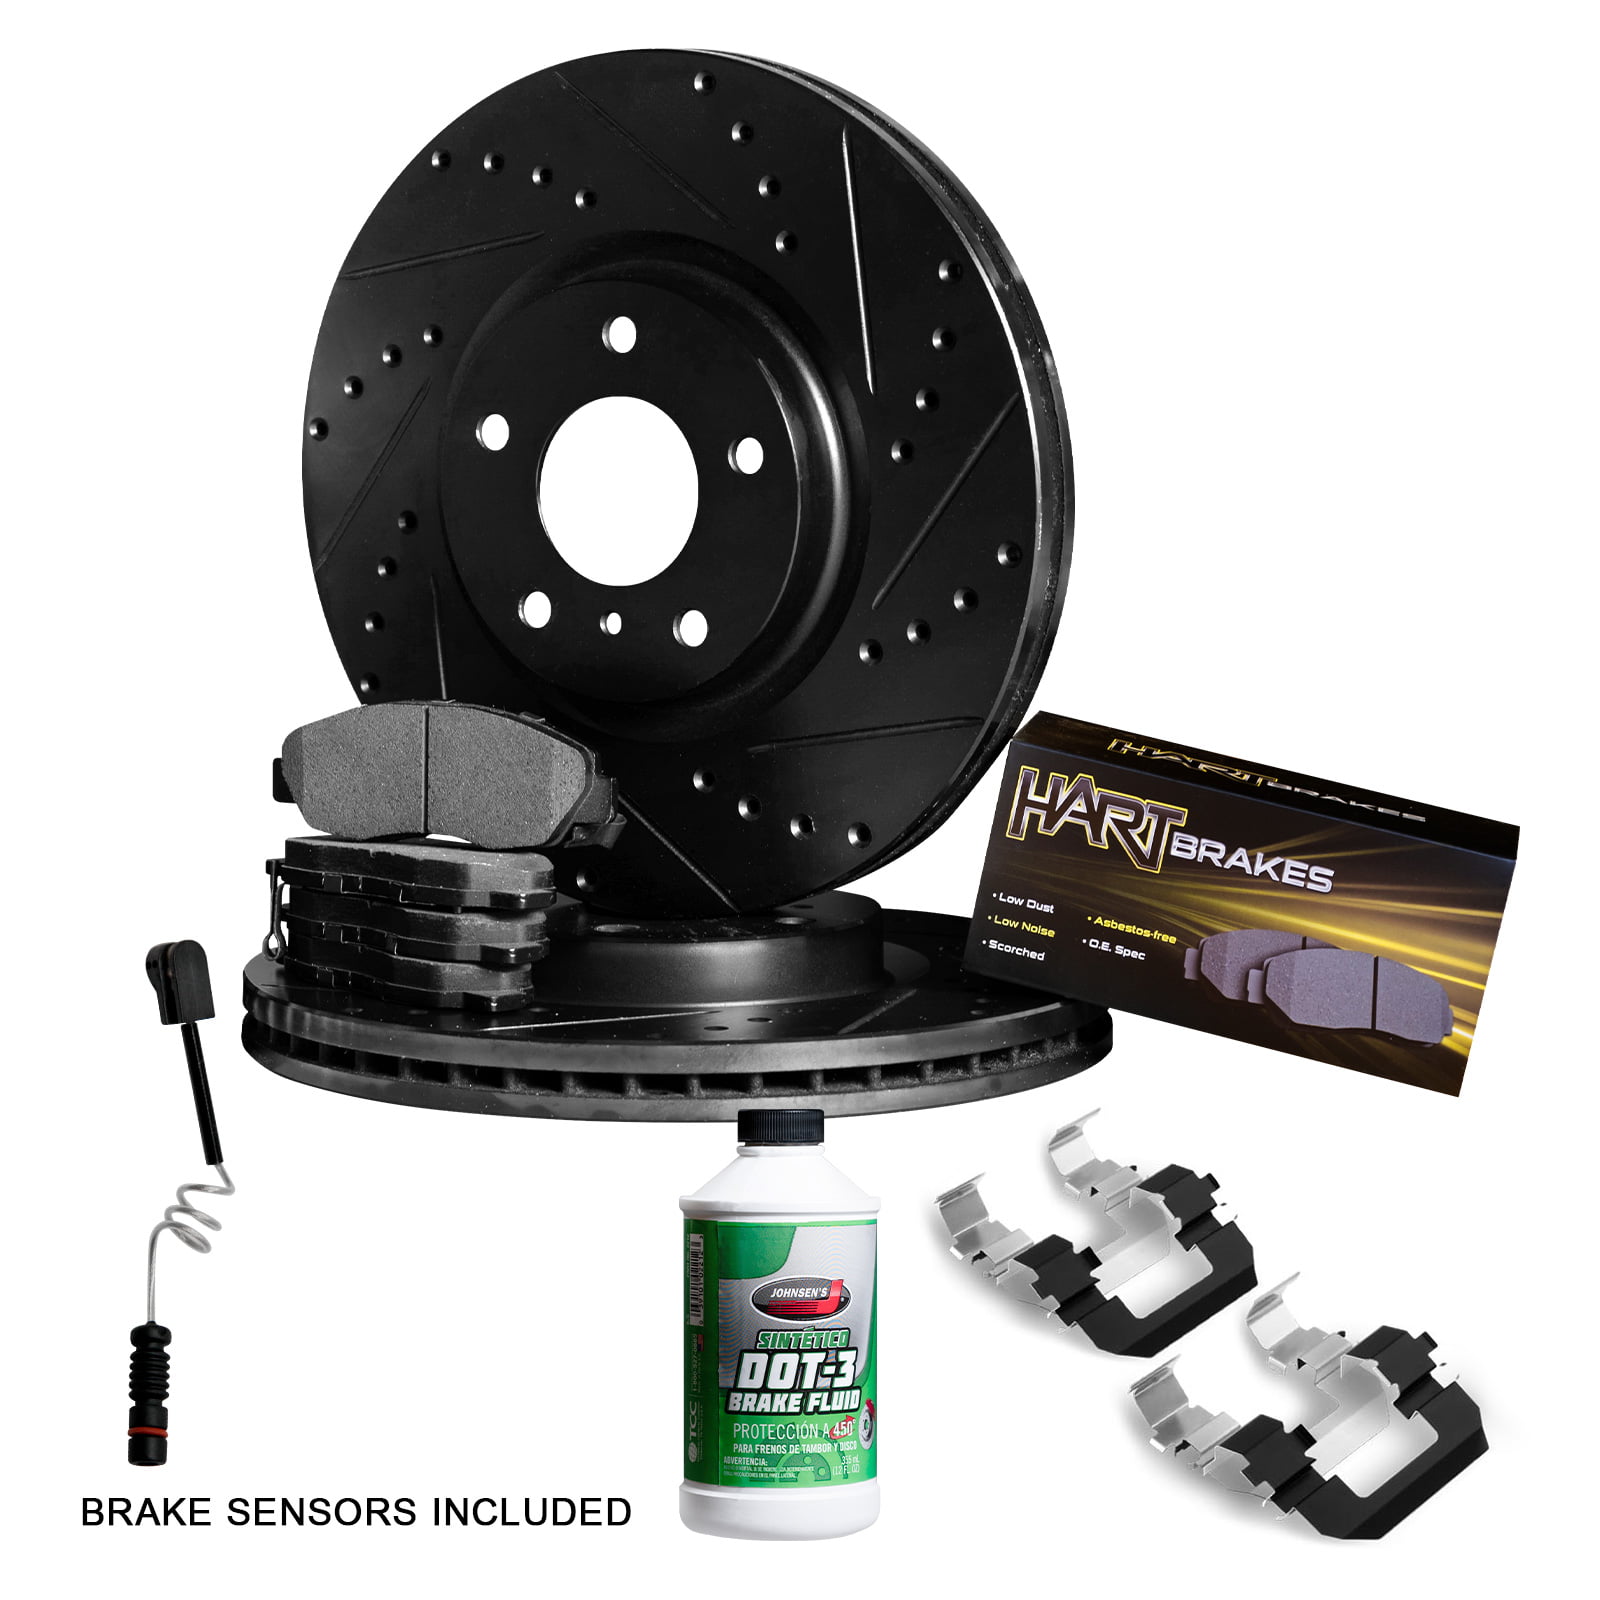 FOR FORD FOCUS 98-04 REAR BRAKE SHOES CYLINDERS FITTING KIT 